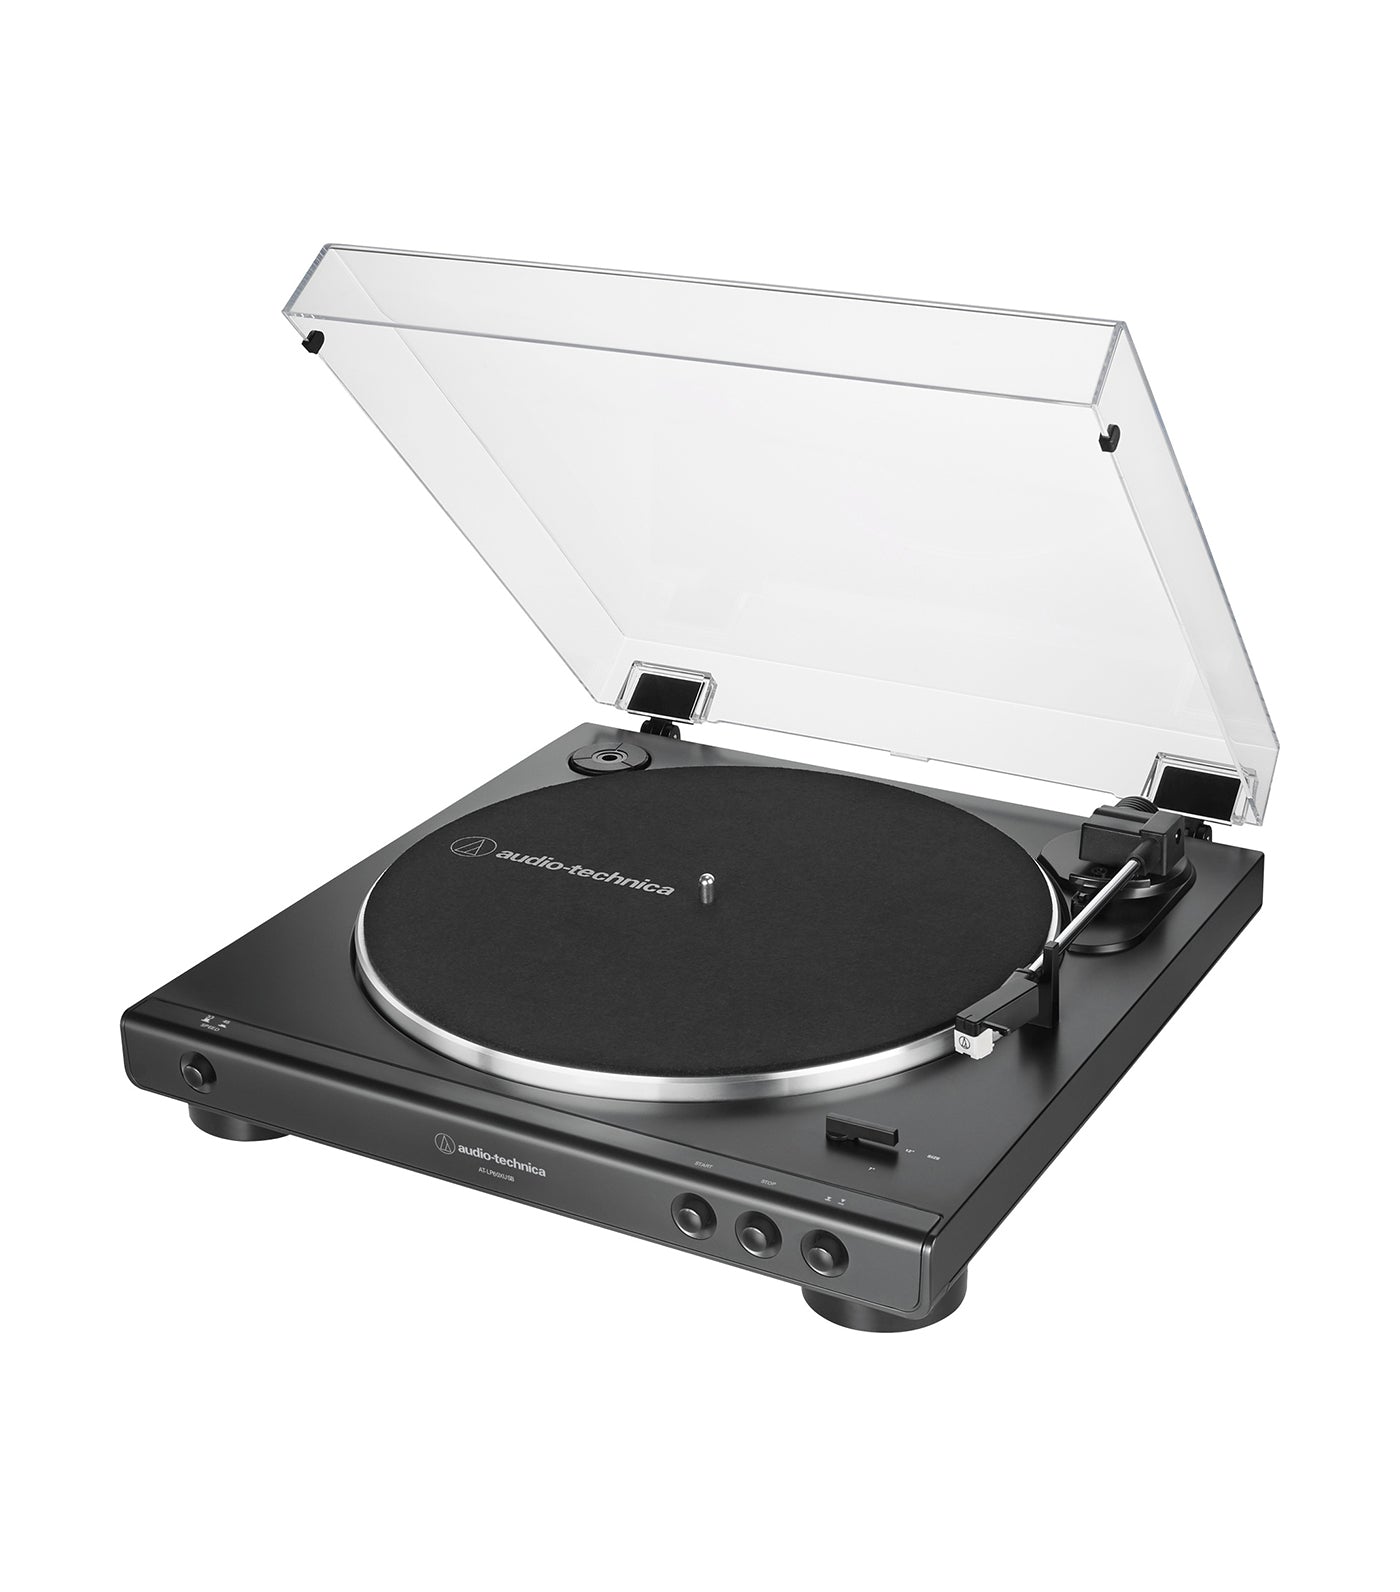 Fully Automatic Belt-Drive Turntable (Analog and USB)